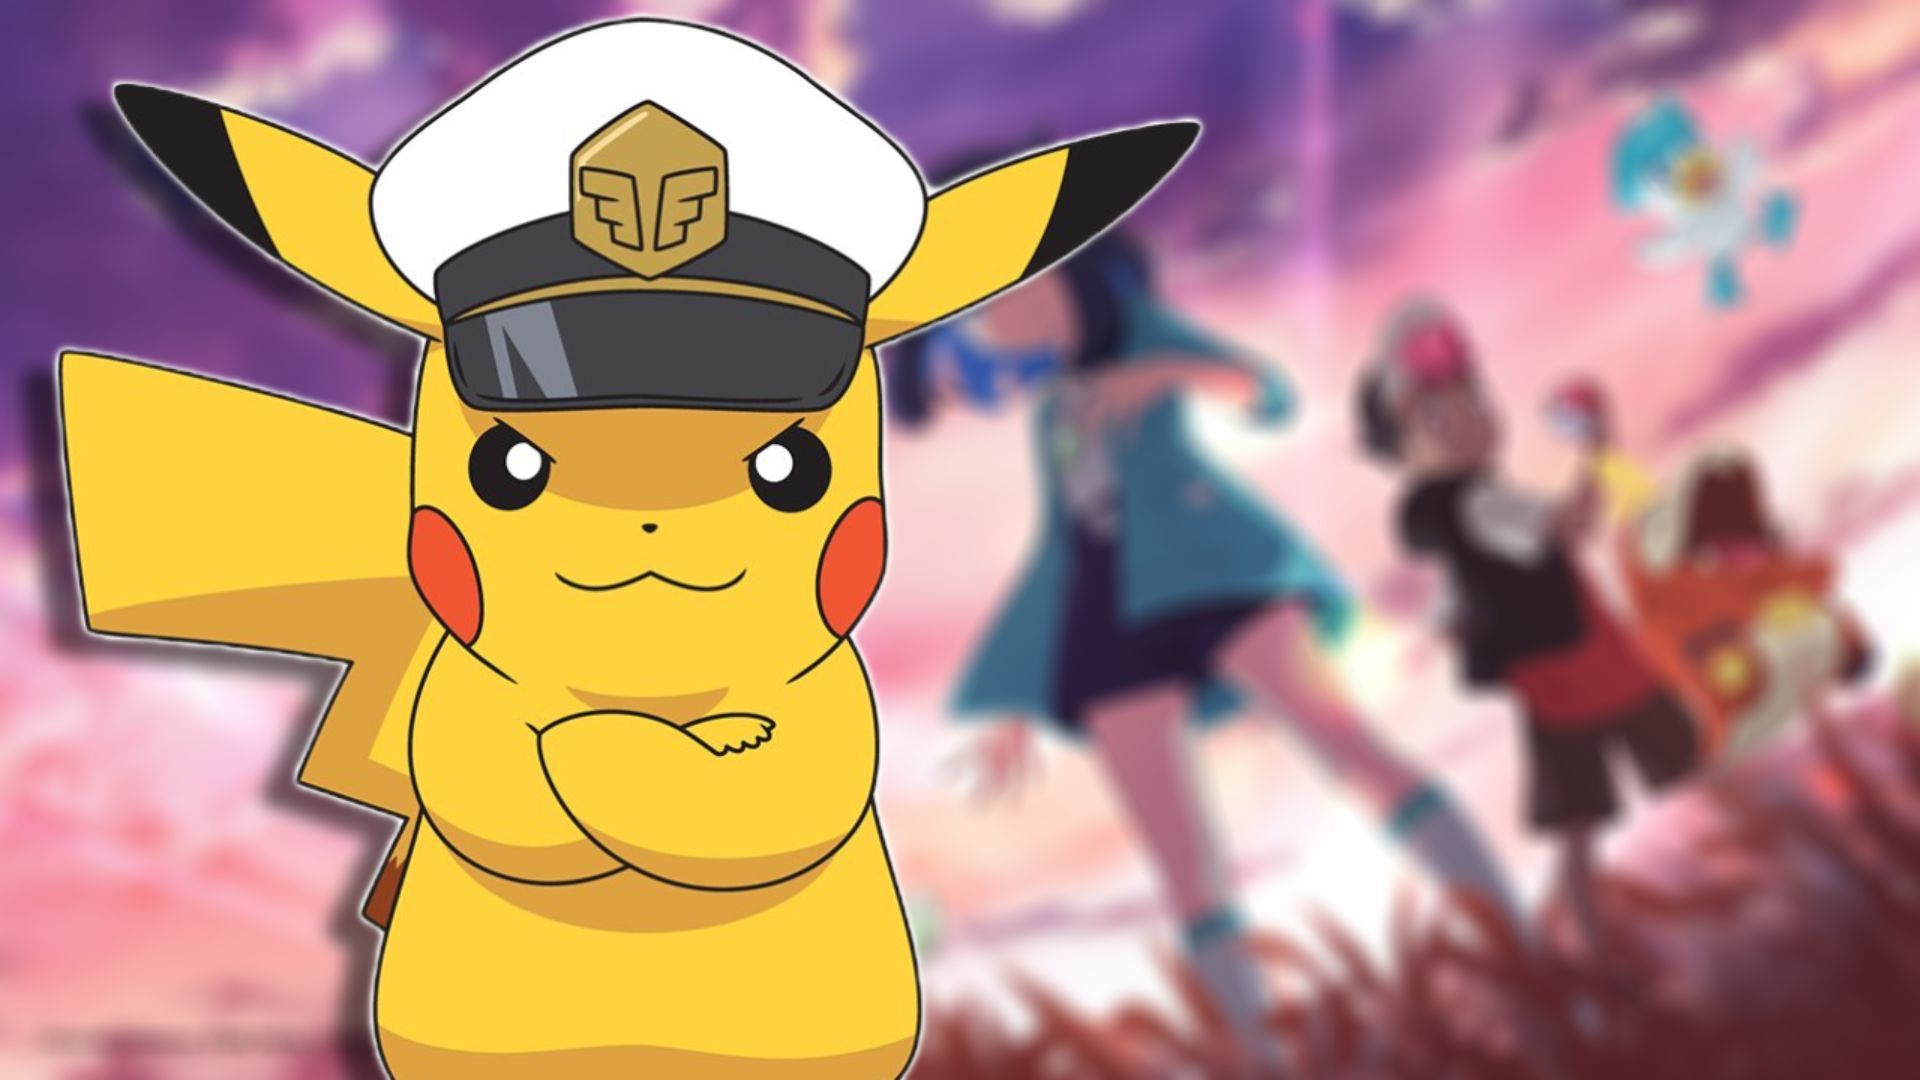 Every Pokemon Anime Series Ranked from Worst to Best Remastered - YouTube